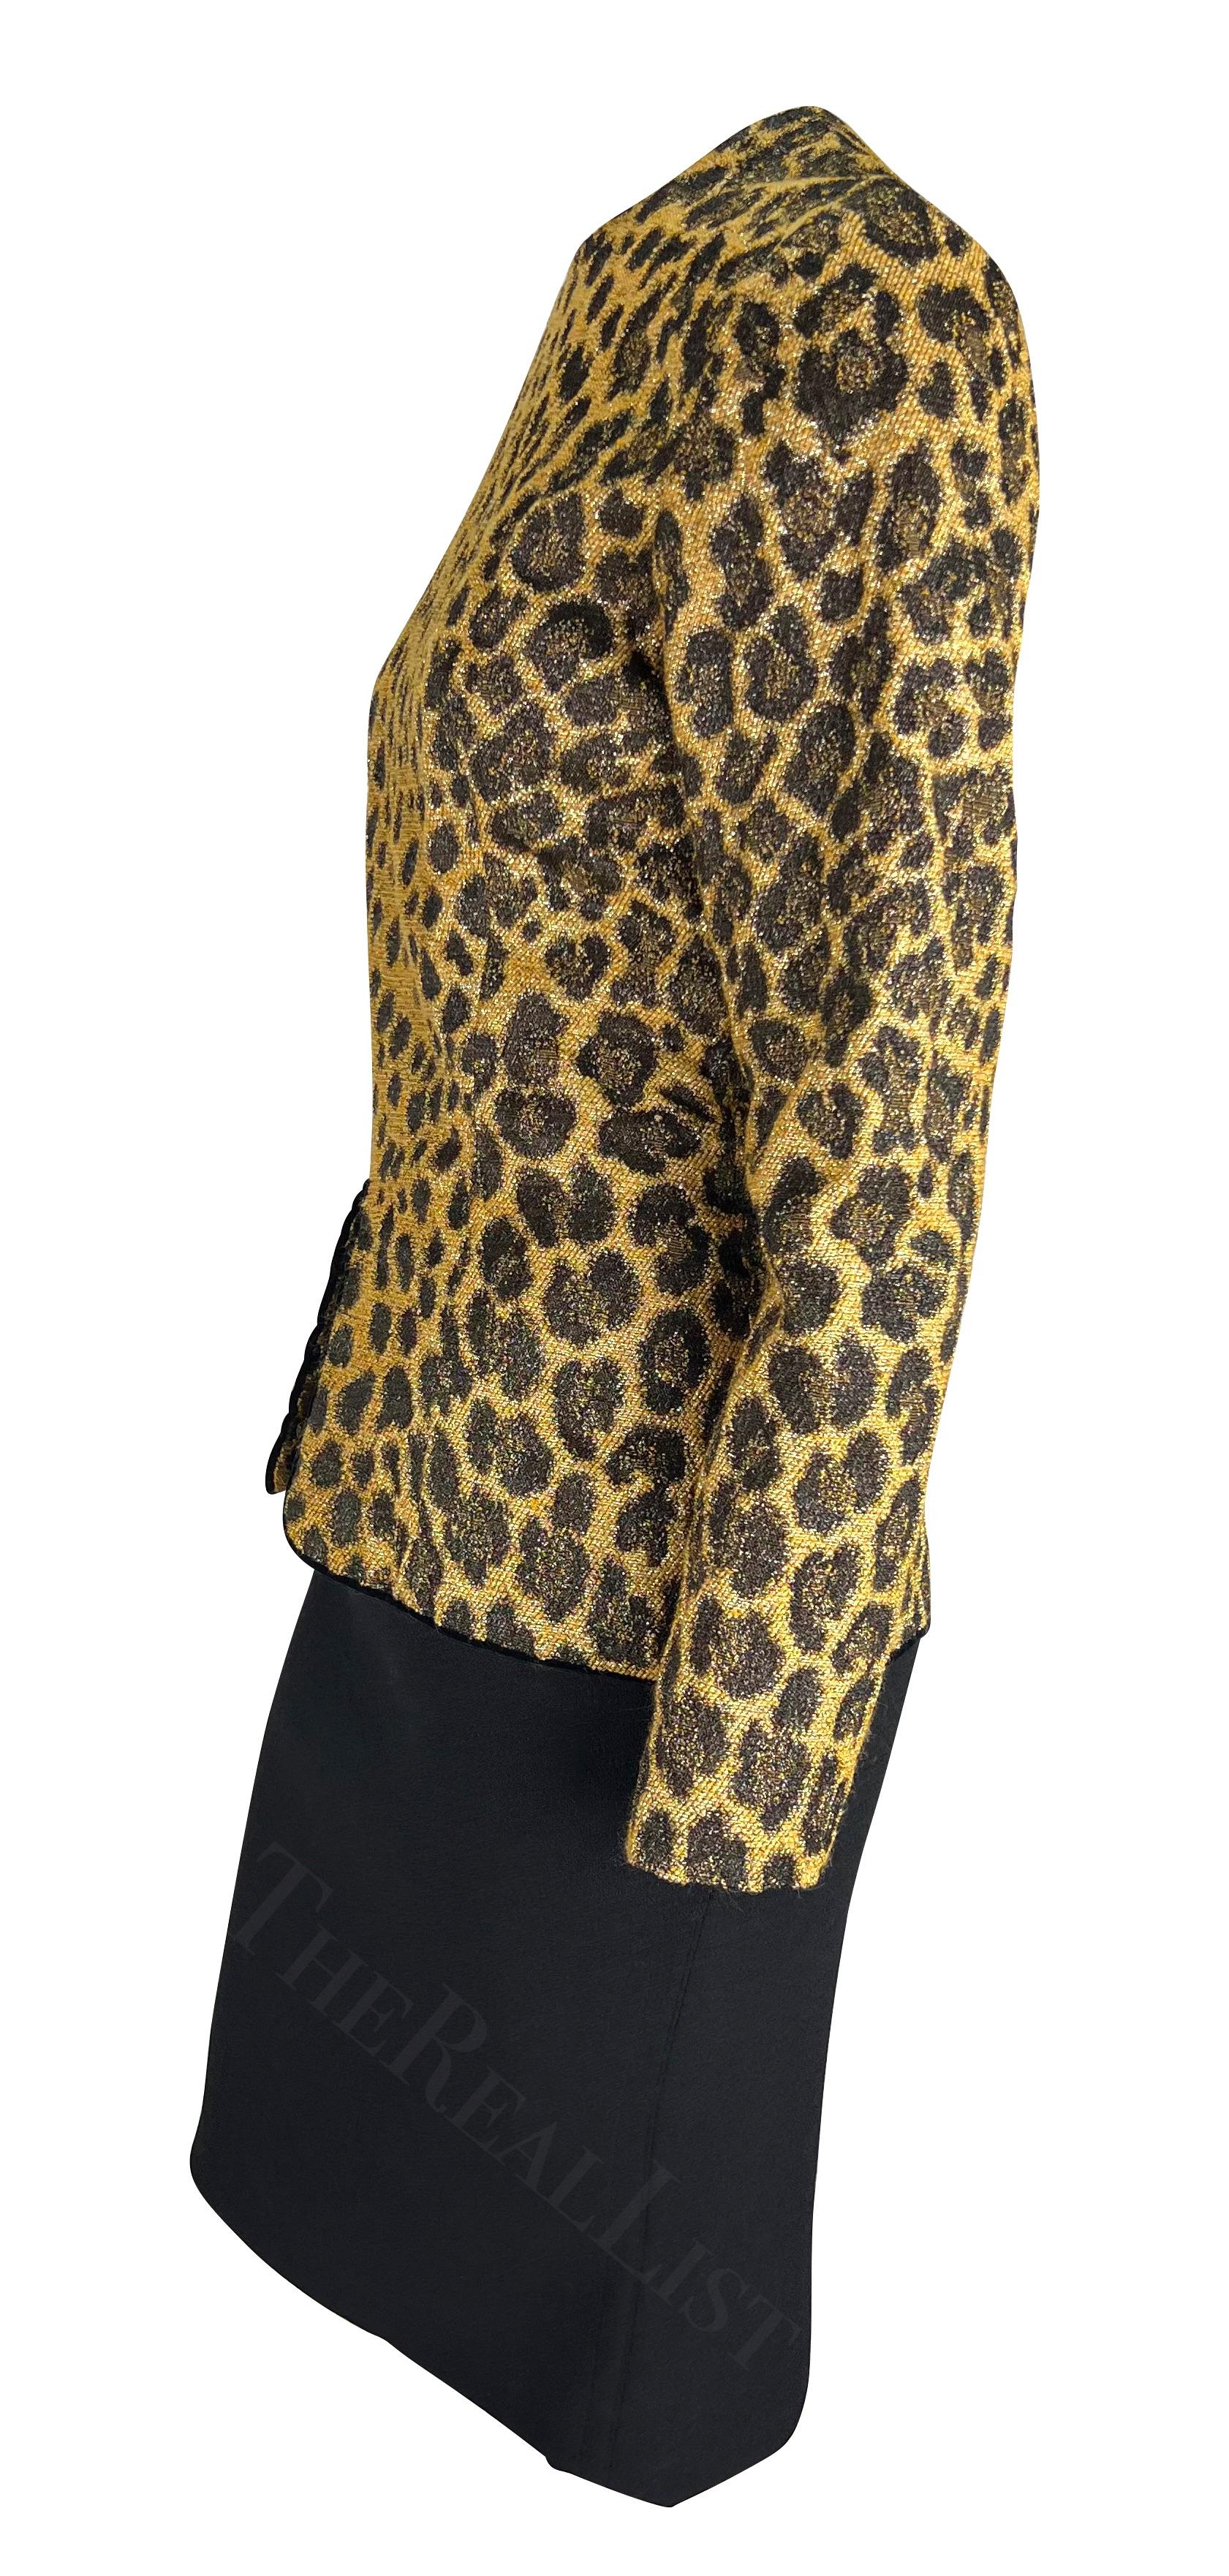 Early 1990s Christian Dior by Gianfranco Ferre Cheetah Print Embroidered Dress For Sale 2